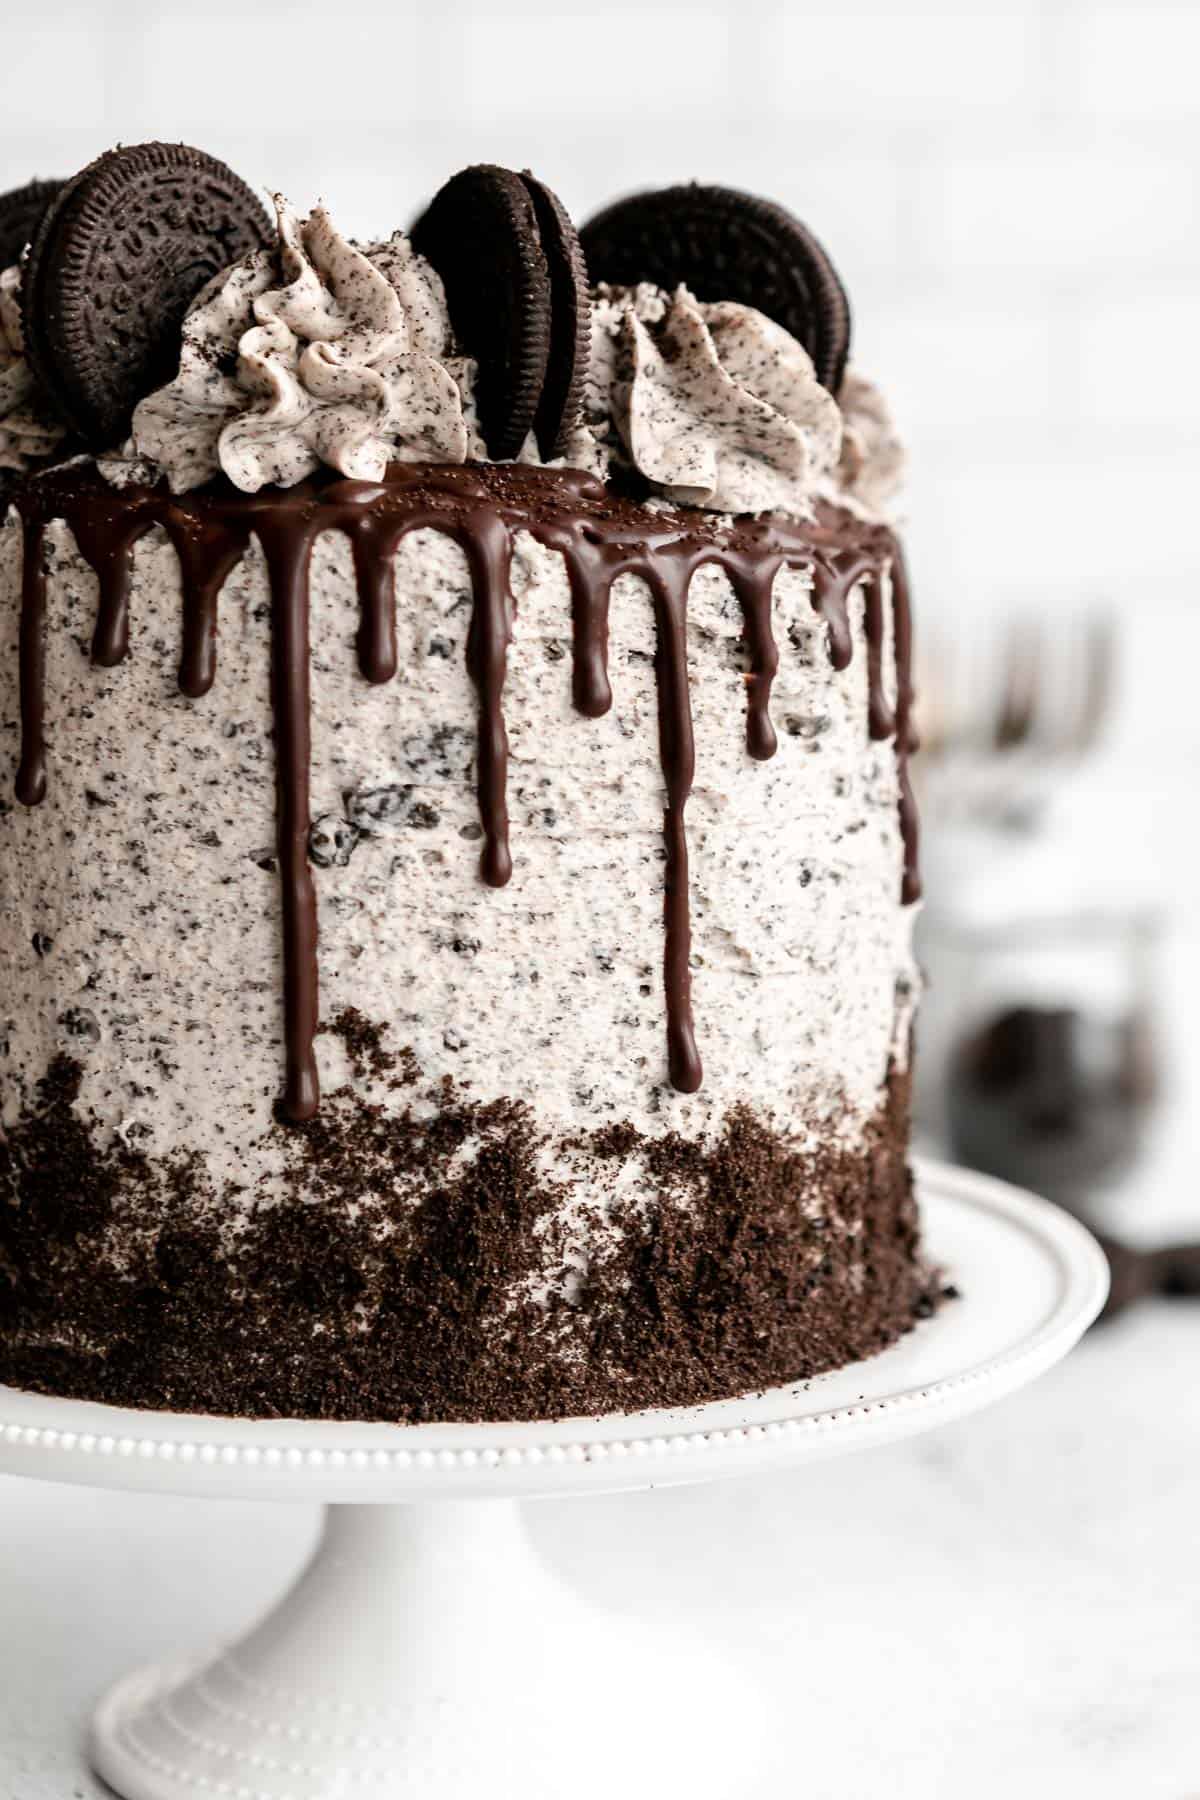 oreo cake on a cake stand with chocolate ganache drip down the side